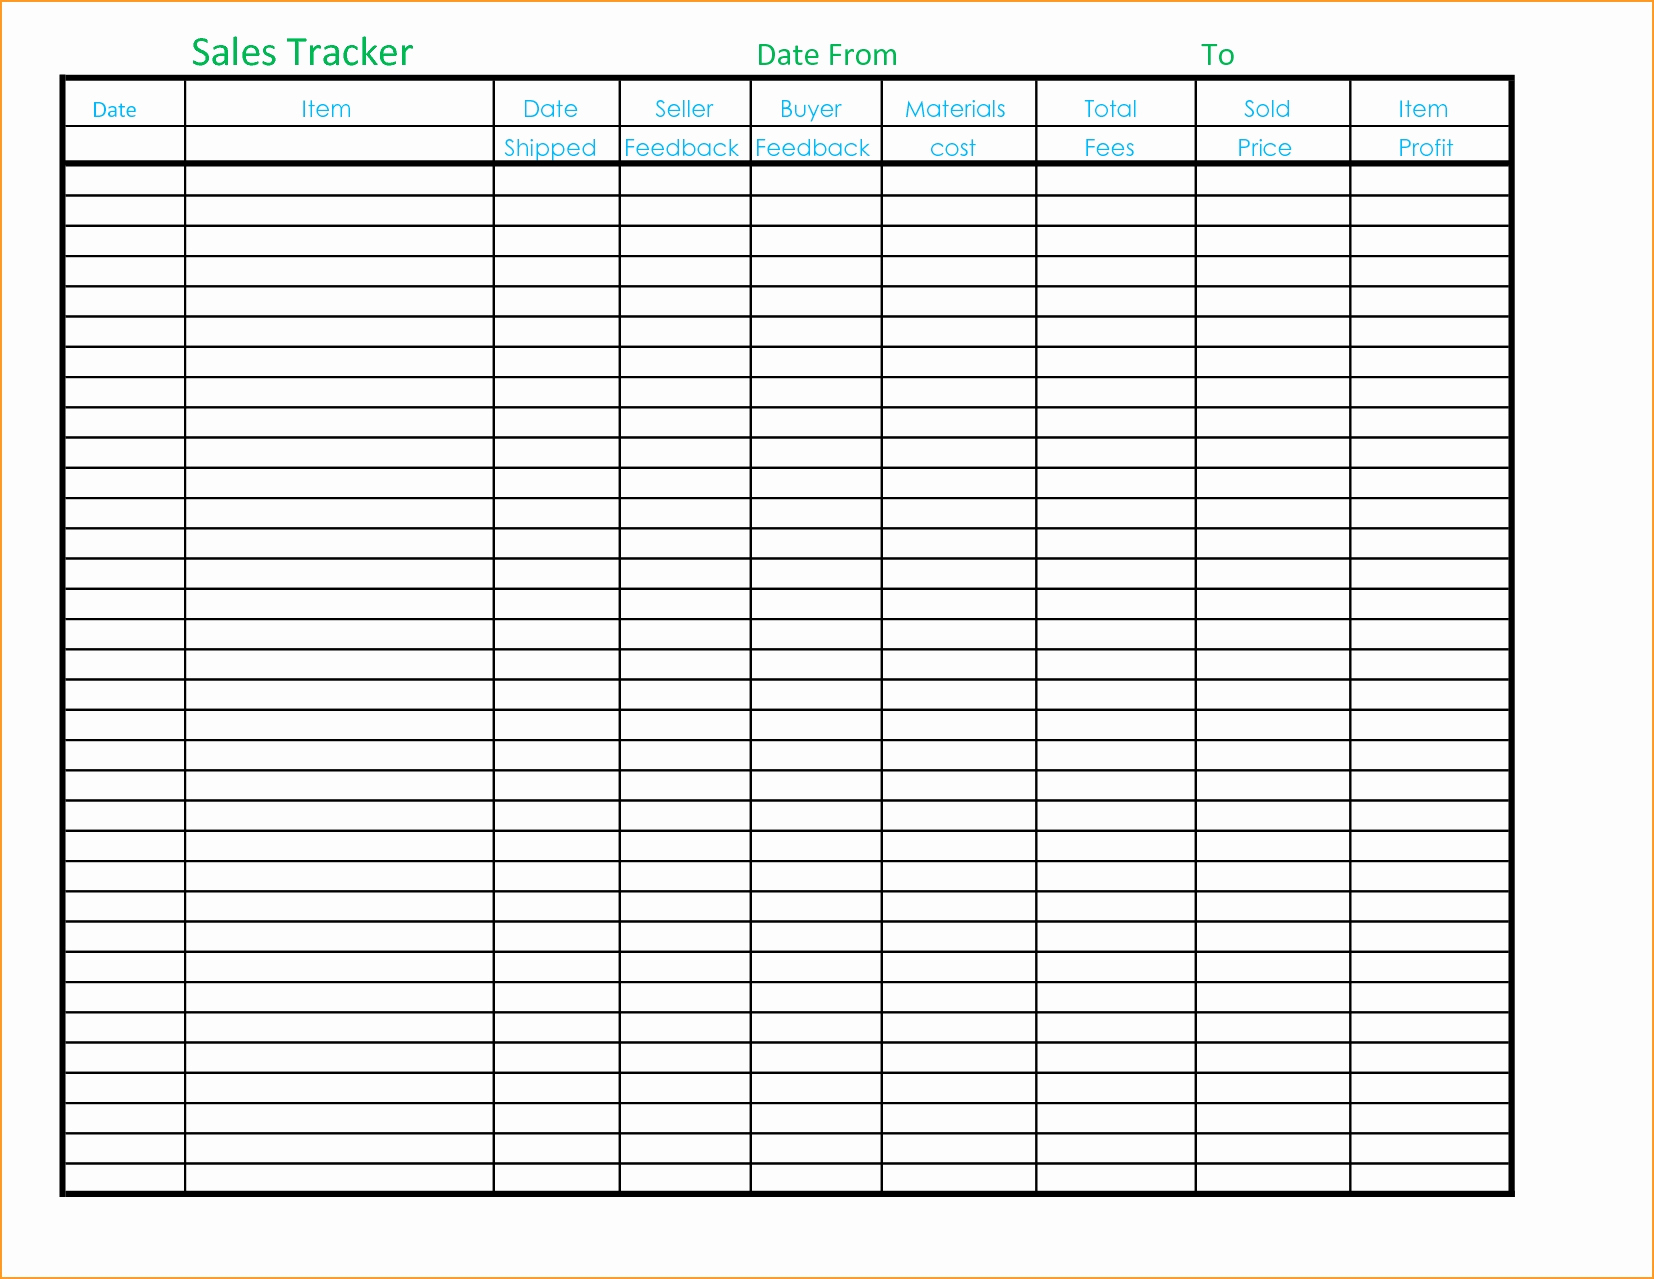 Technician Productivity Spreadsheet Within Machine Downtime Tracking Template Inspirationalpreadsheet Examples